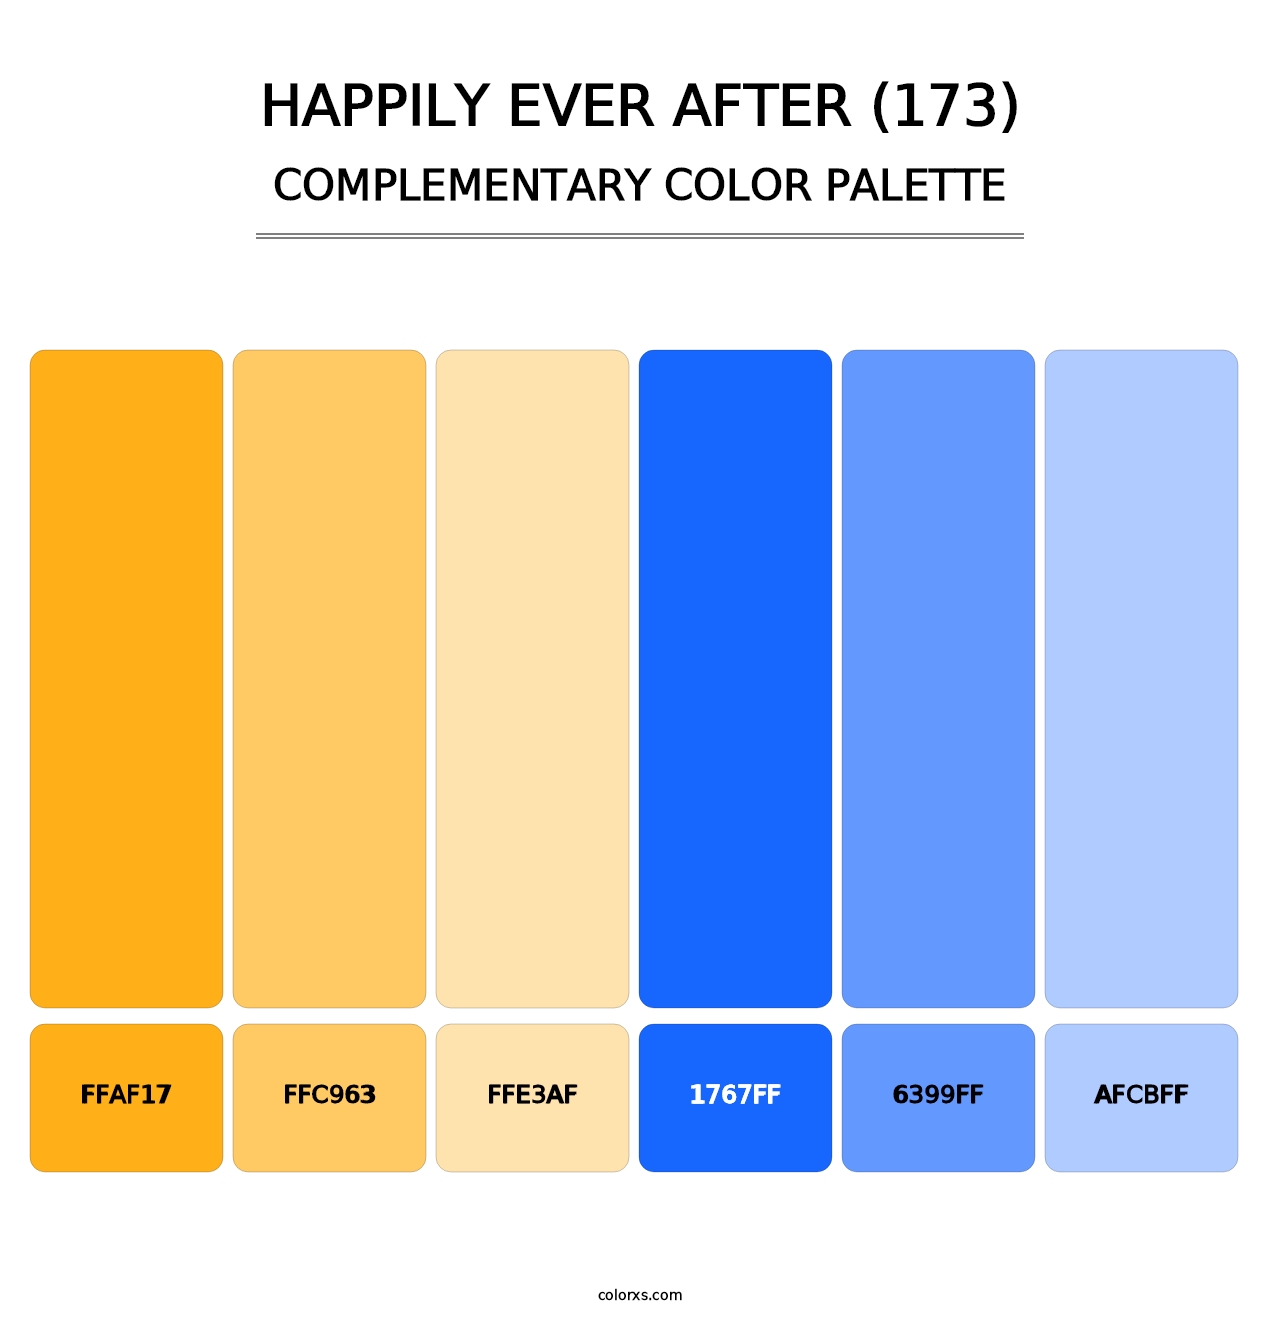 Happily Ever After (173) - Complementary Color Palette